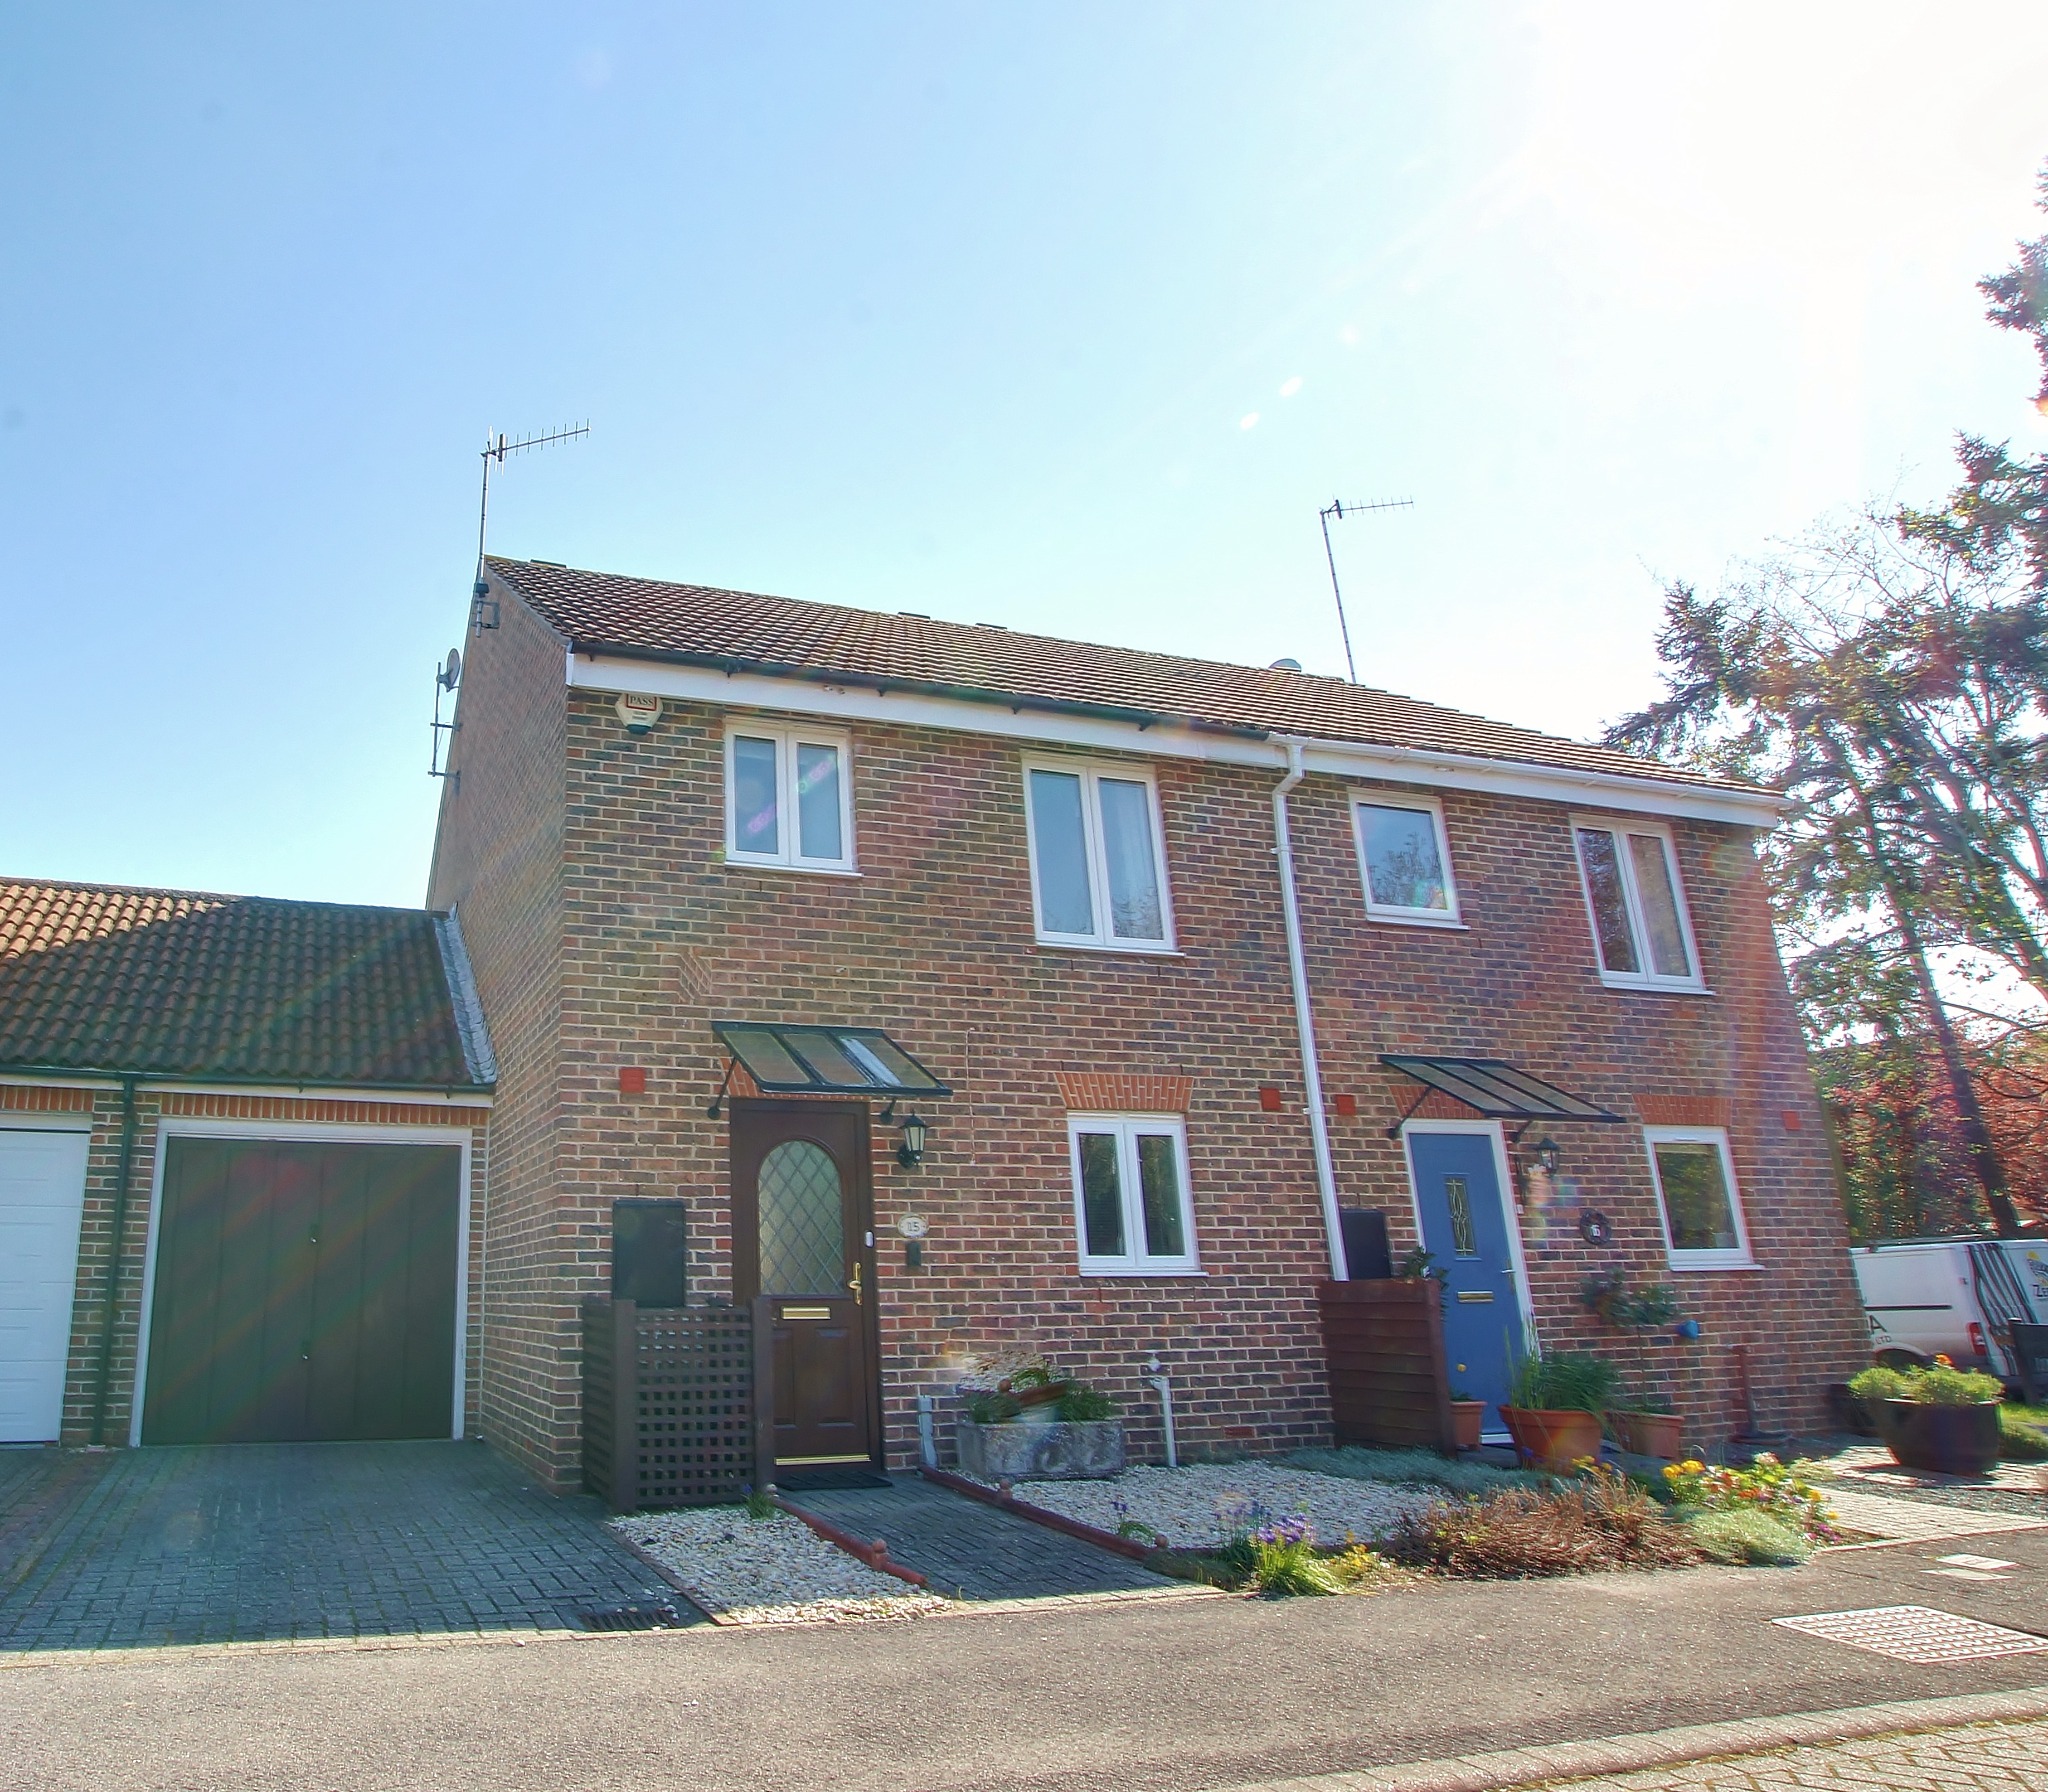 2 bed Semi-Detached House for rent in Hythe. From Pearsons Estate Agents - Hythe